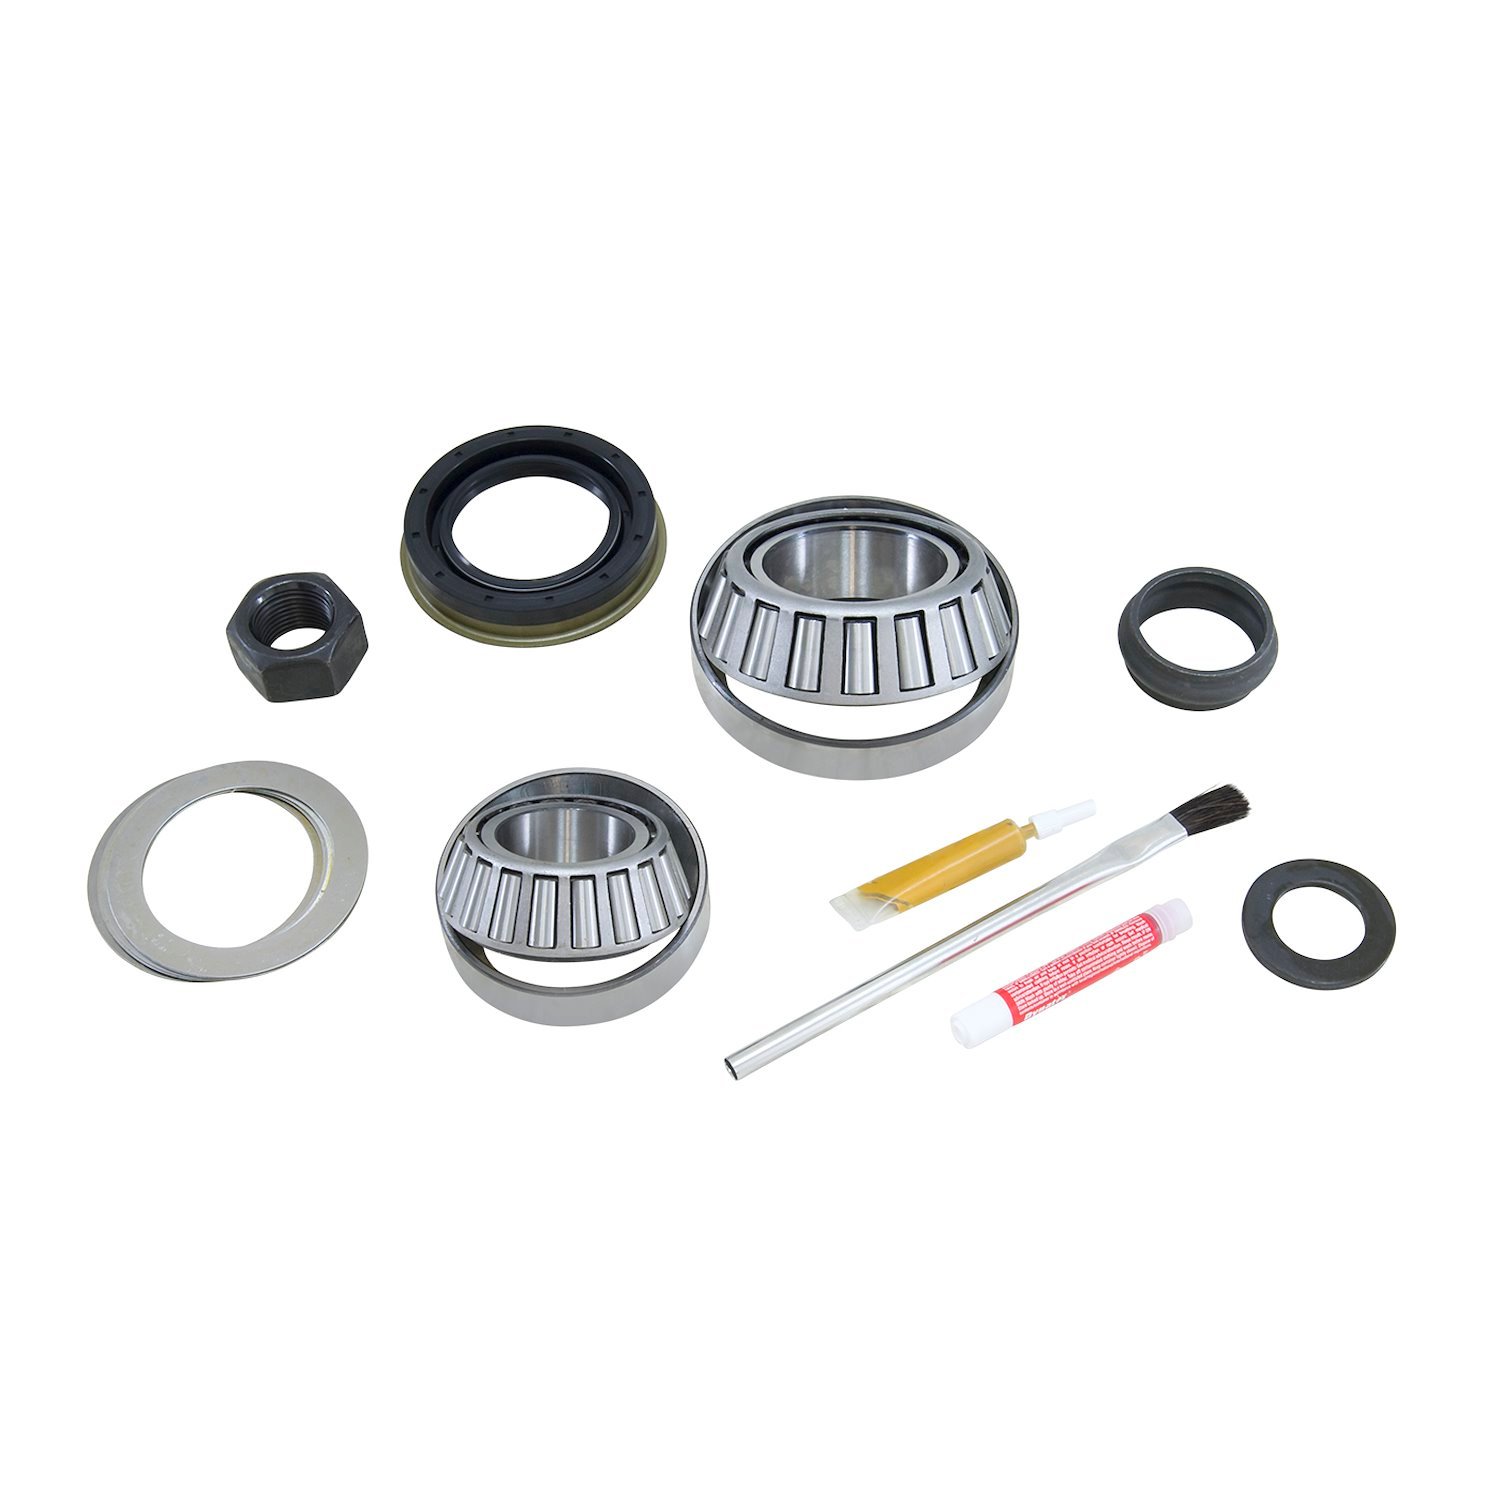 Pinion Install Kit For Dana 44 Ica Differential